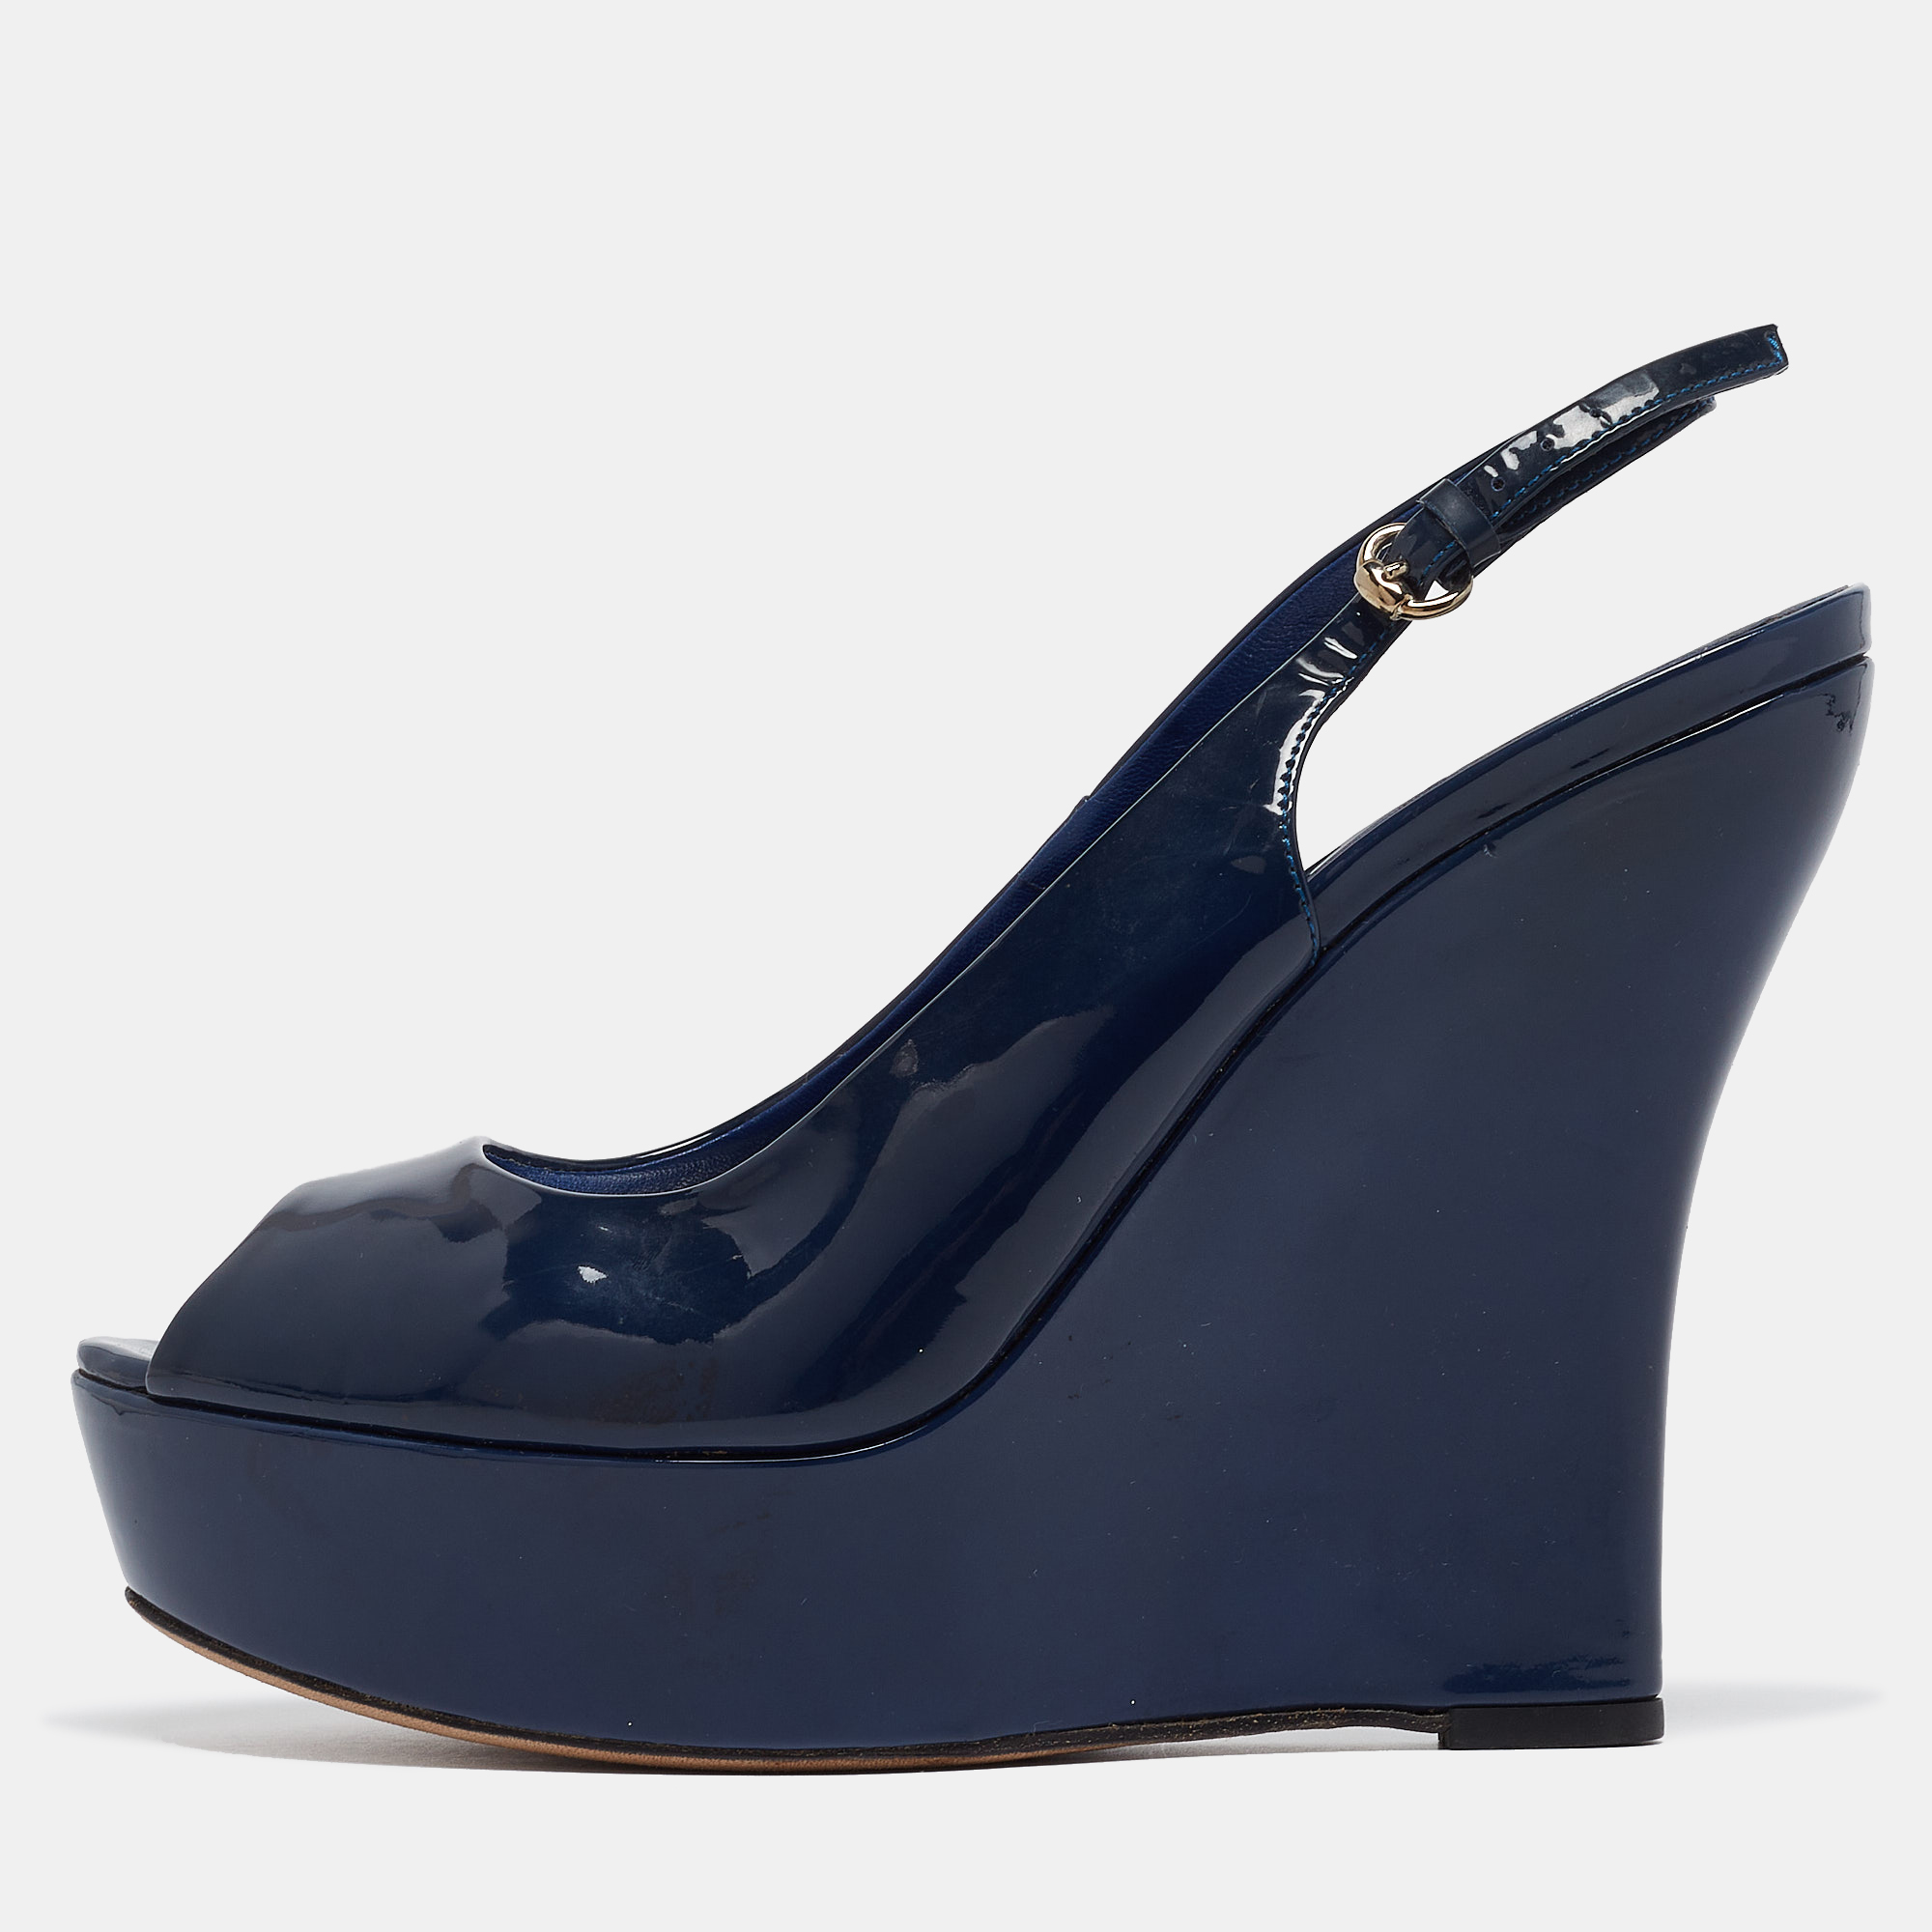 Gucci navy blue patent leather slingback wedge sandals size 39